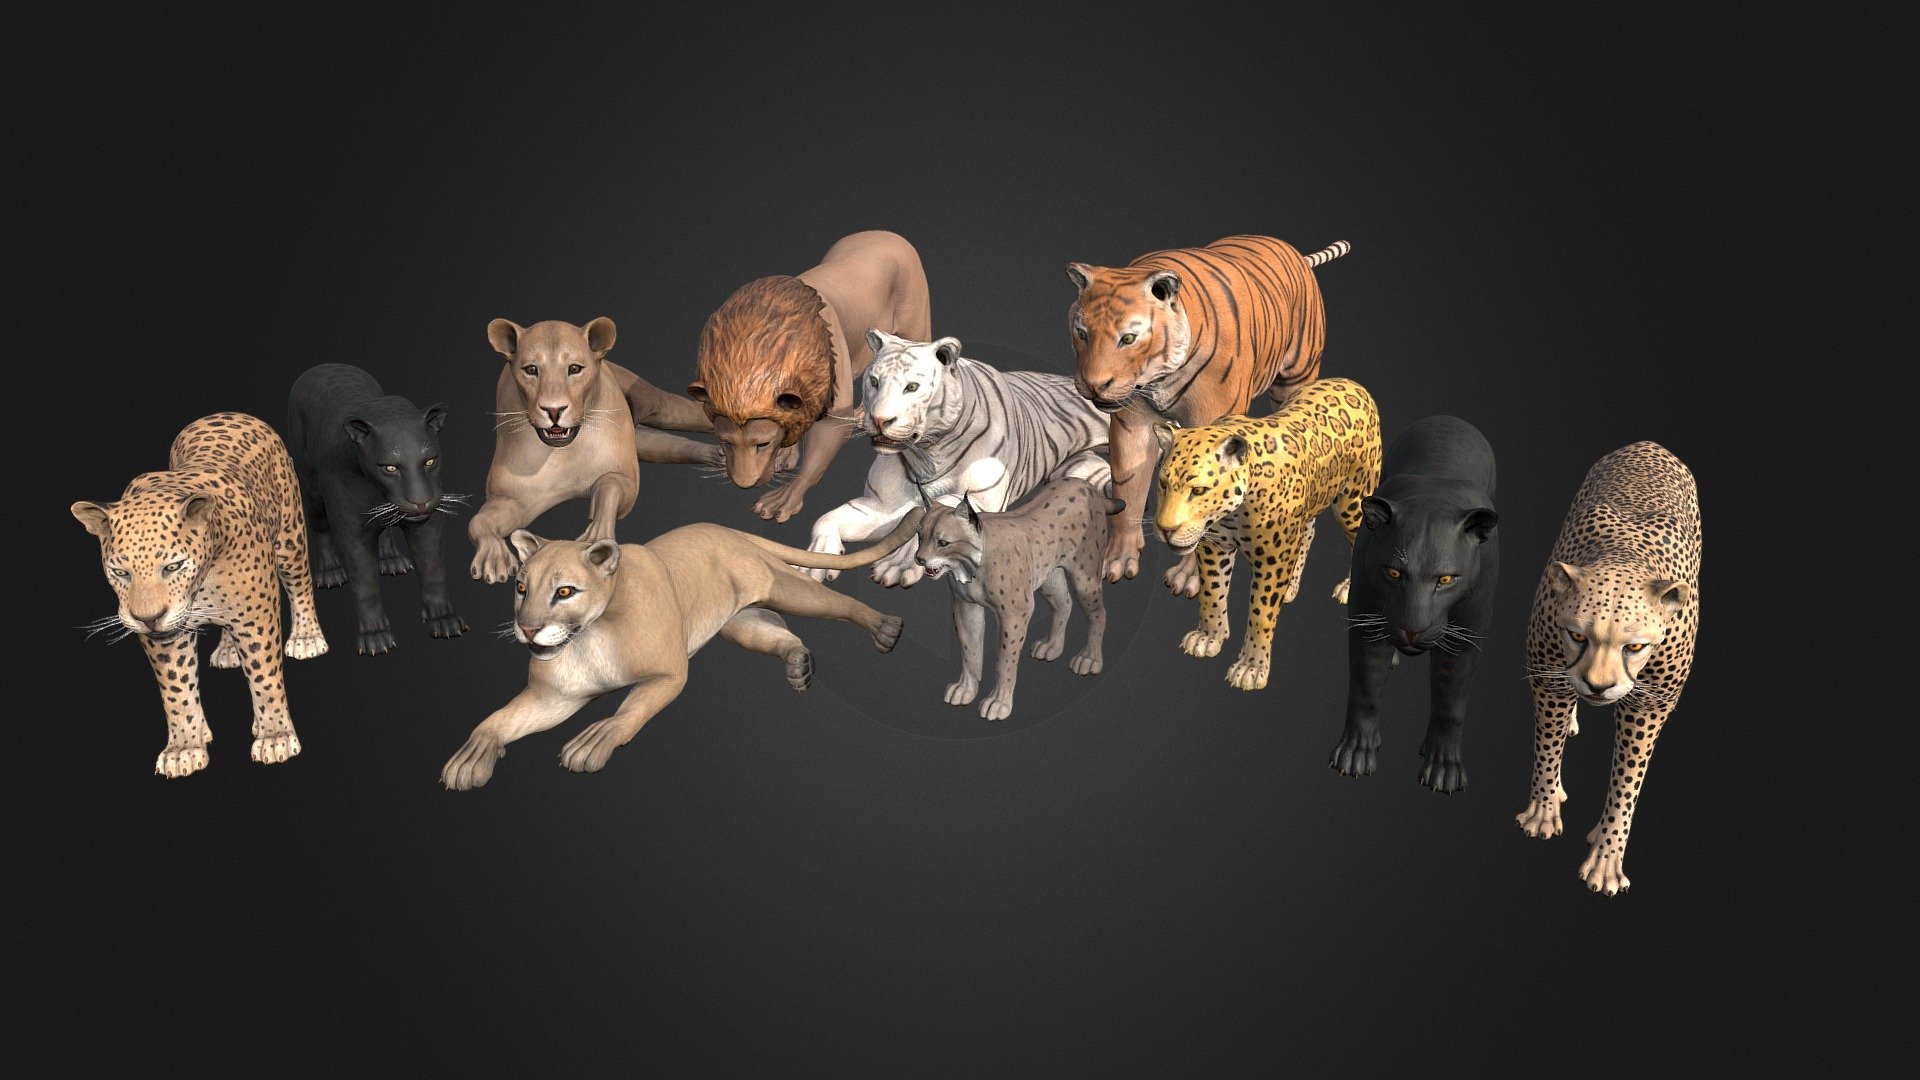 This asset has Wild  cats pack




Lion 25000 tris (6200 tris mobile version)

Lioness 23800 tris (6150 tris mobile version)

Tiger 26000 tris (6100 tris mobile version)

Jaguar 25750 tris (6000 tris mobile version)

Leopard 24650 tris (4900 tris mobile version)

Cheetah 25450 tris (6900 tris mobile version)

Puma 23200 tris (4400 tris mobile version)

Lynx 23550 tris (6350 tris mobile version)

All models have 76 animations

Texture dimensions: 2048*2048.

Leopard, Jaguard and Tiger have 2 types of color

All model have 4 LODs.

You can view each model separately using the links below.
* Lion 
* Lioness 
* Tiger
* Jaguar 
* Leopard
* Cheetah 
* Puma 
* Lynx 

If you have any questions, please contact us by mail: Chester9292@mail.ru - Pack Of Wild Cats - Buy Royalty Free 3D model by Darina3D 3d model